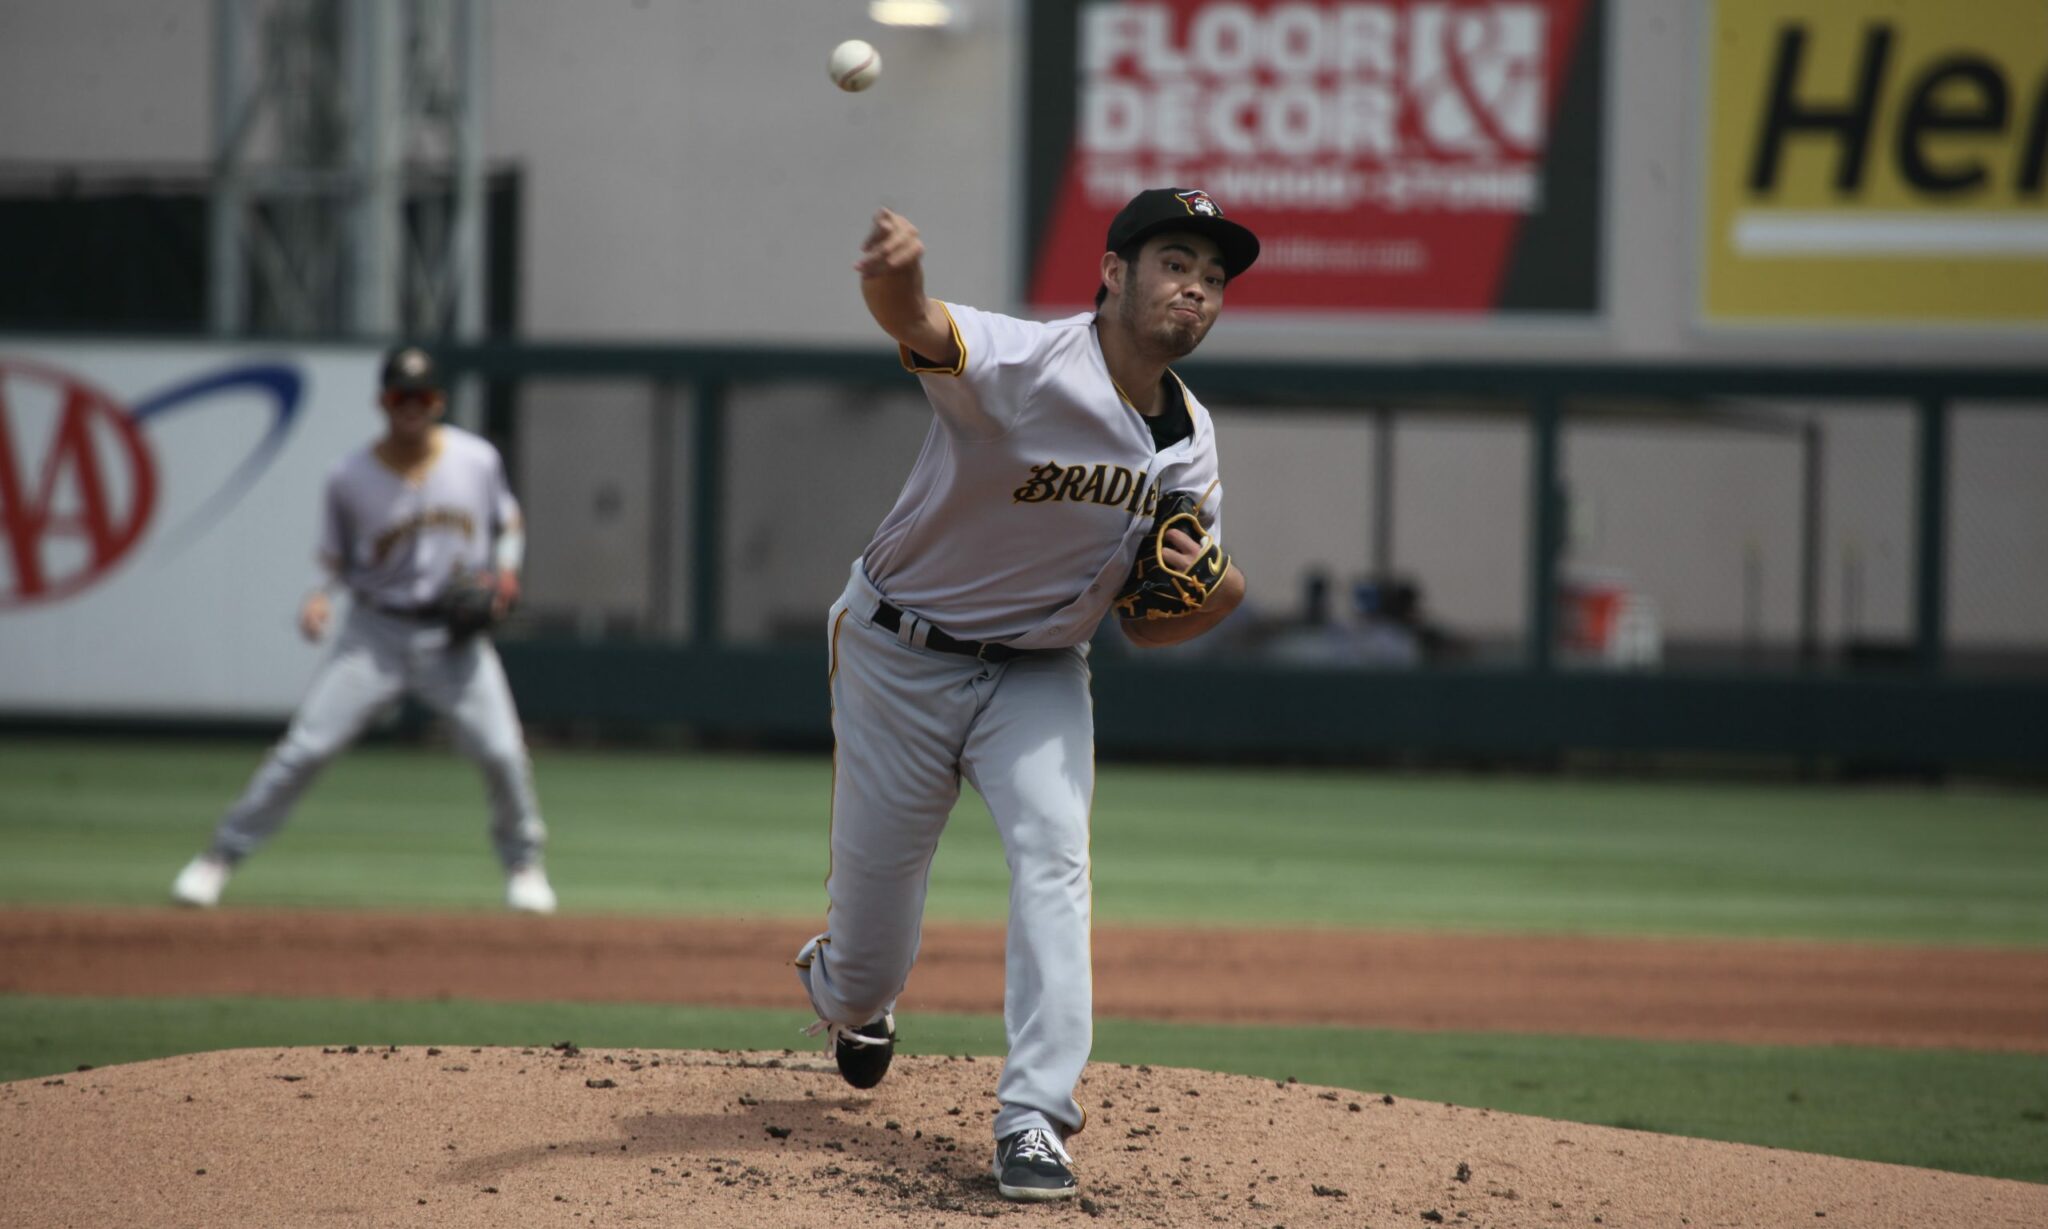 Po-Yu Chen Looks Much Better in His Second Chance with Bradenton